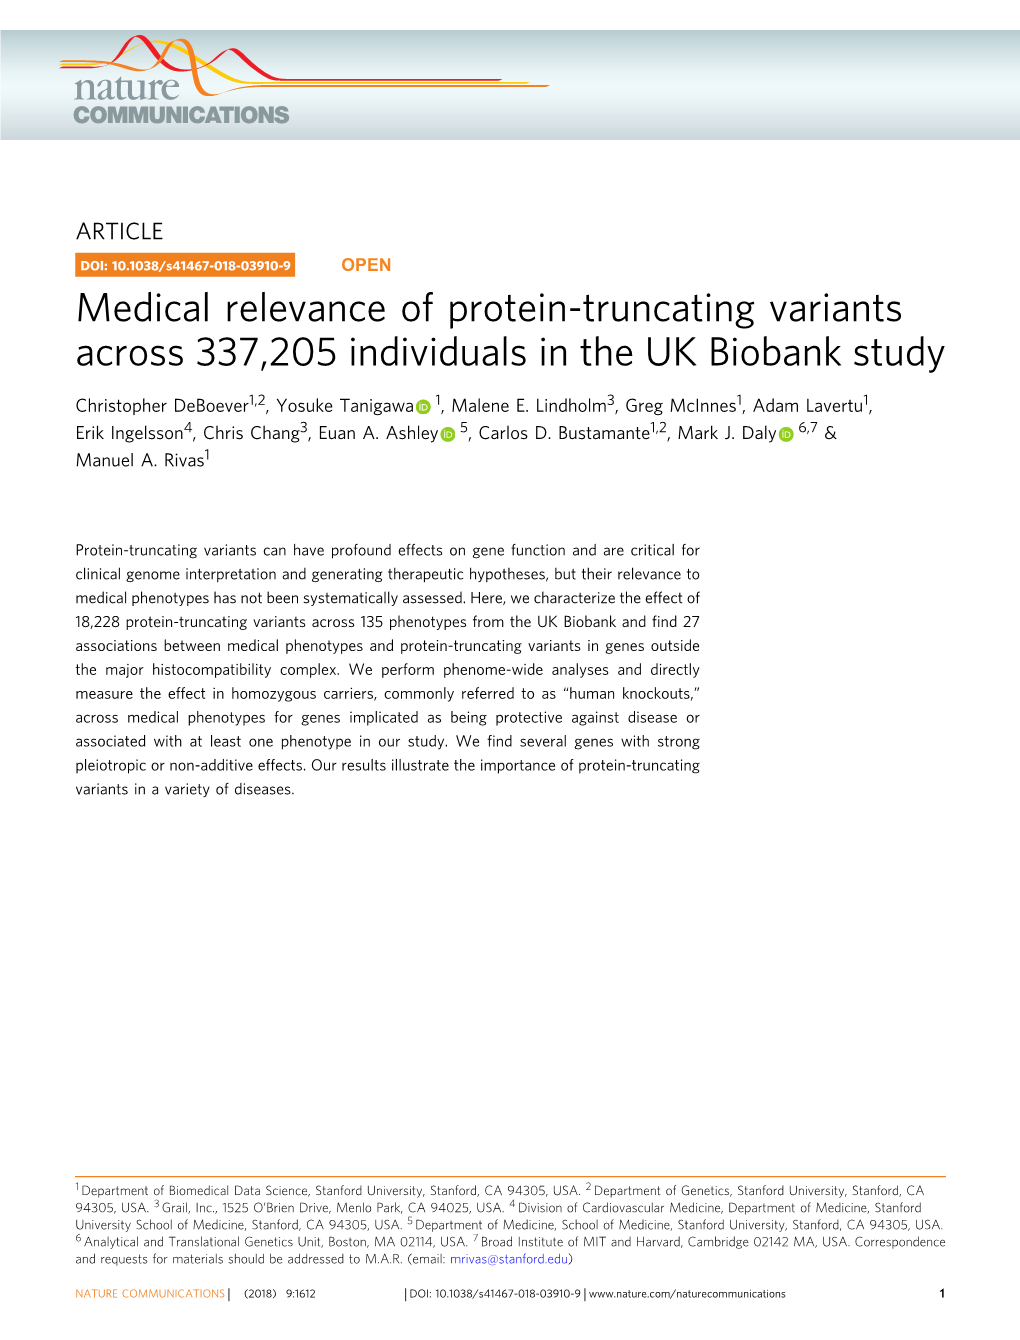 Medical Relevance of Protein-Truncating Variants Across 337,205 Individuals in the UK Biobank Study